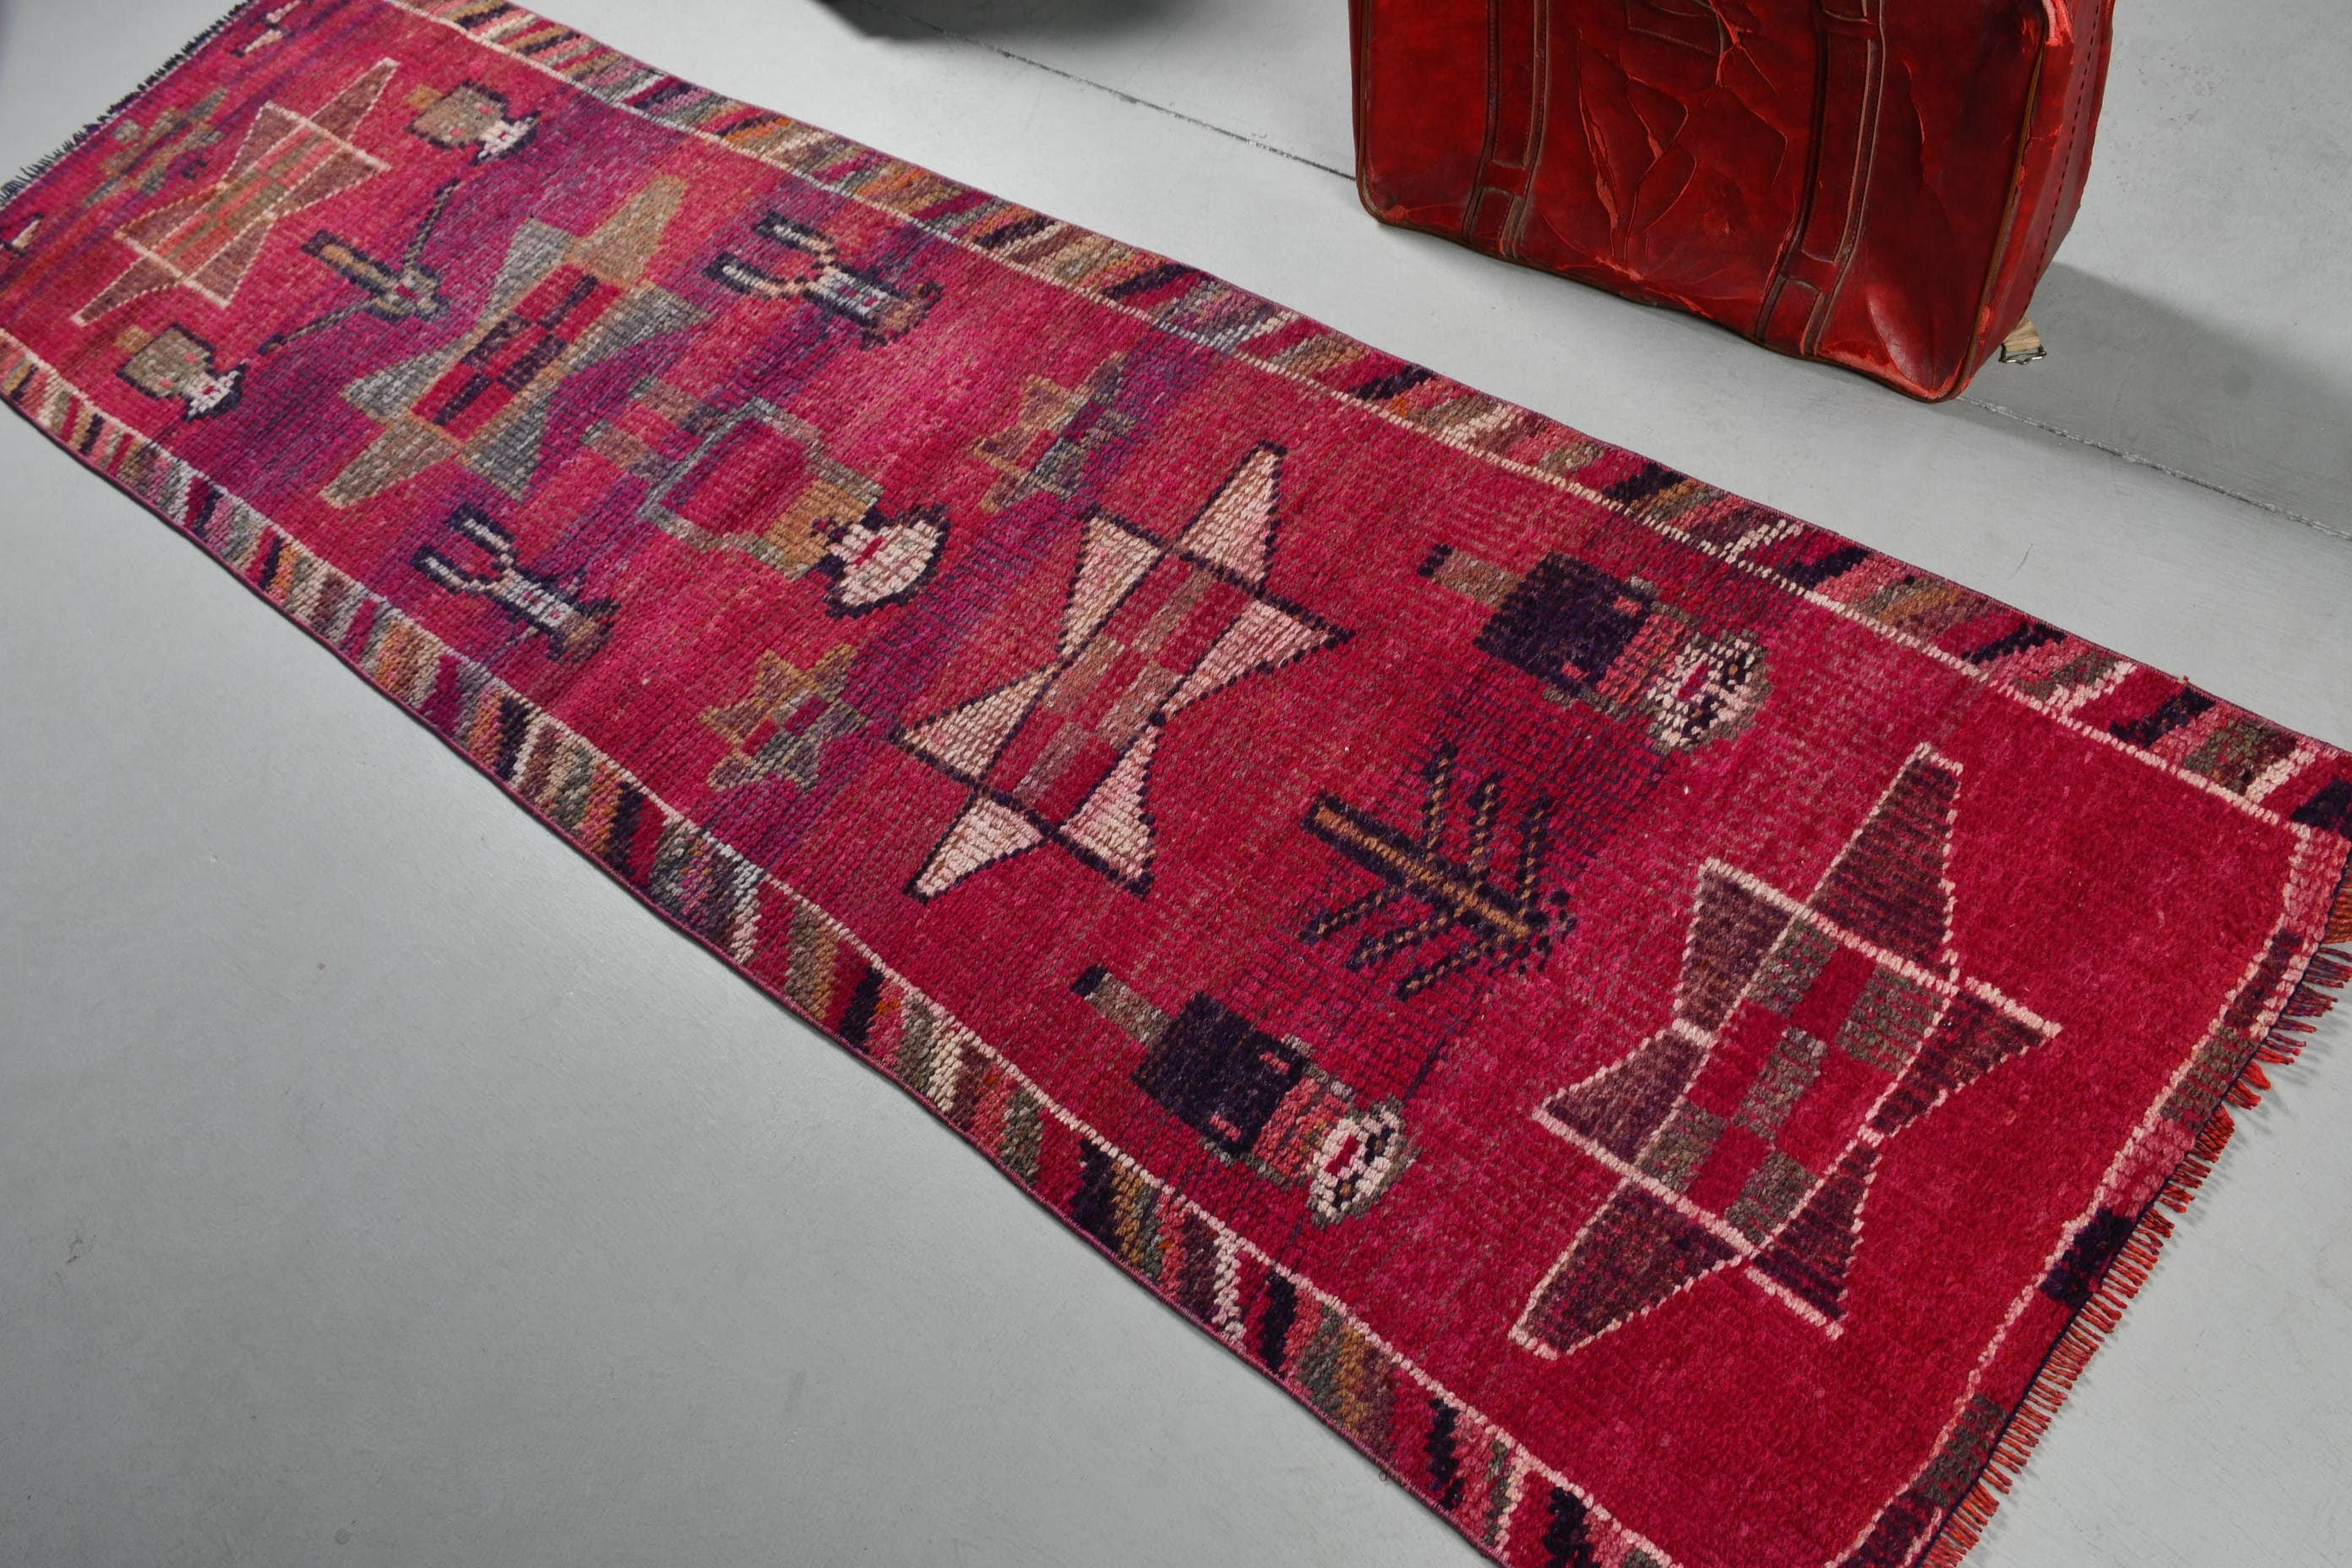 Rugs for Corridor, 2.8x9.2 ft Runner Rug, Retro Rug, Kitchen Rug, Home Decor Rug, Red Anatolian Rugs, Turkish Rug, Stair Rugs, Vintage Rugs